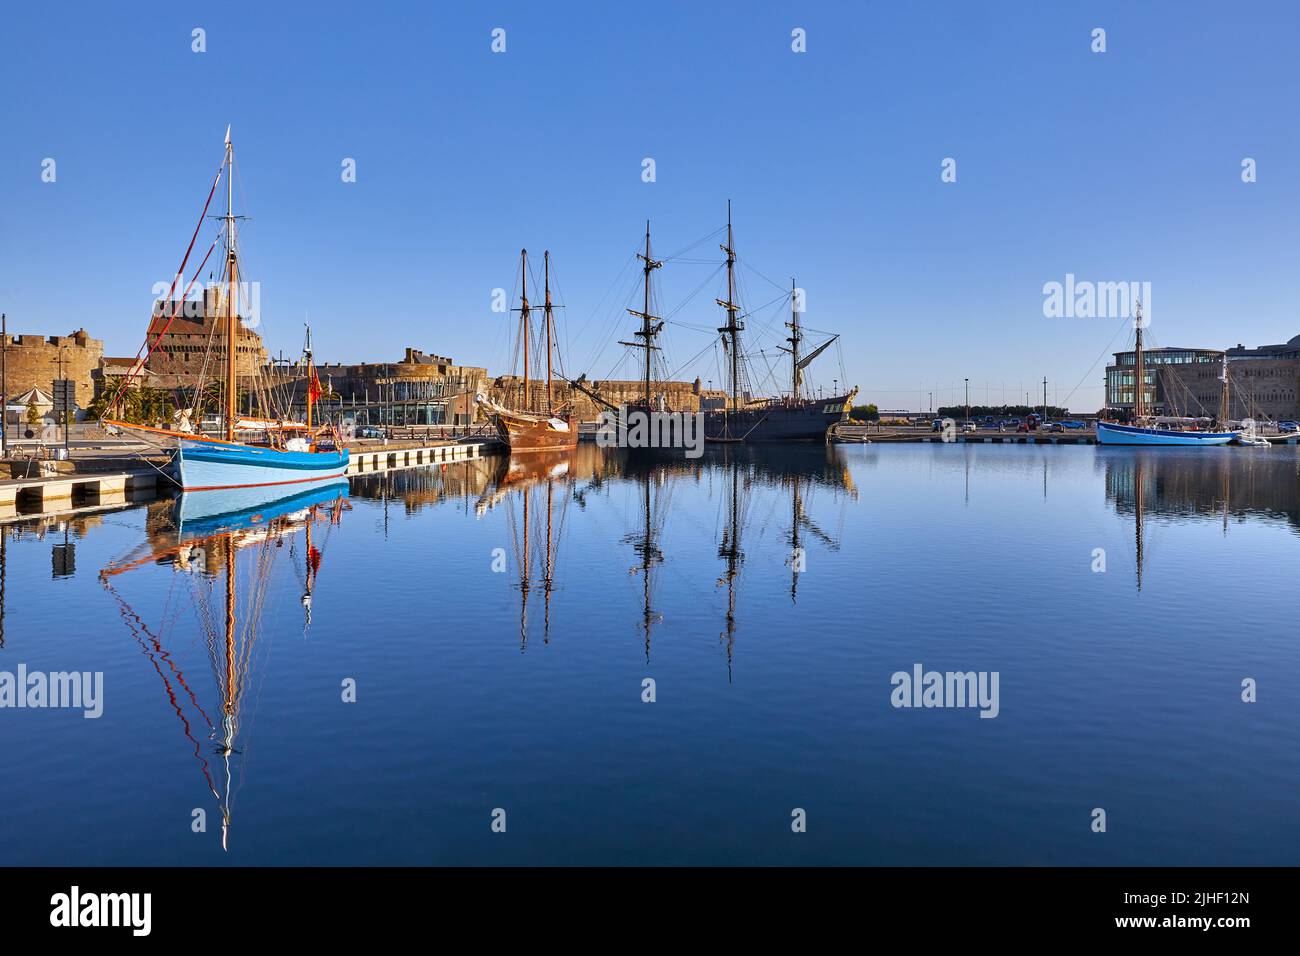 Image of St Malo pool with sailing ships Stock Photo